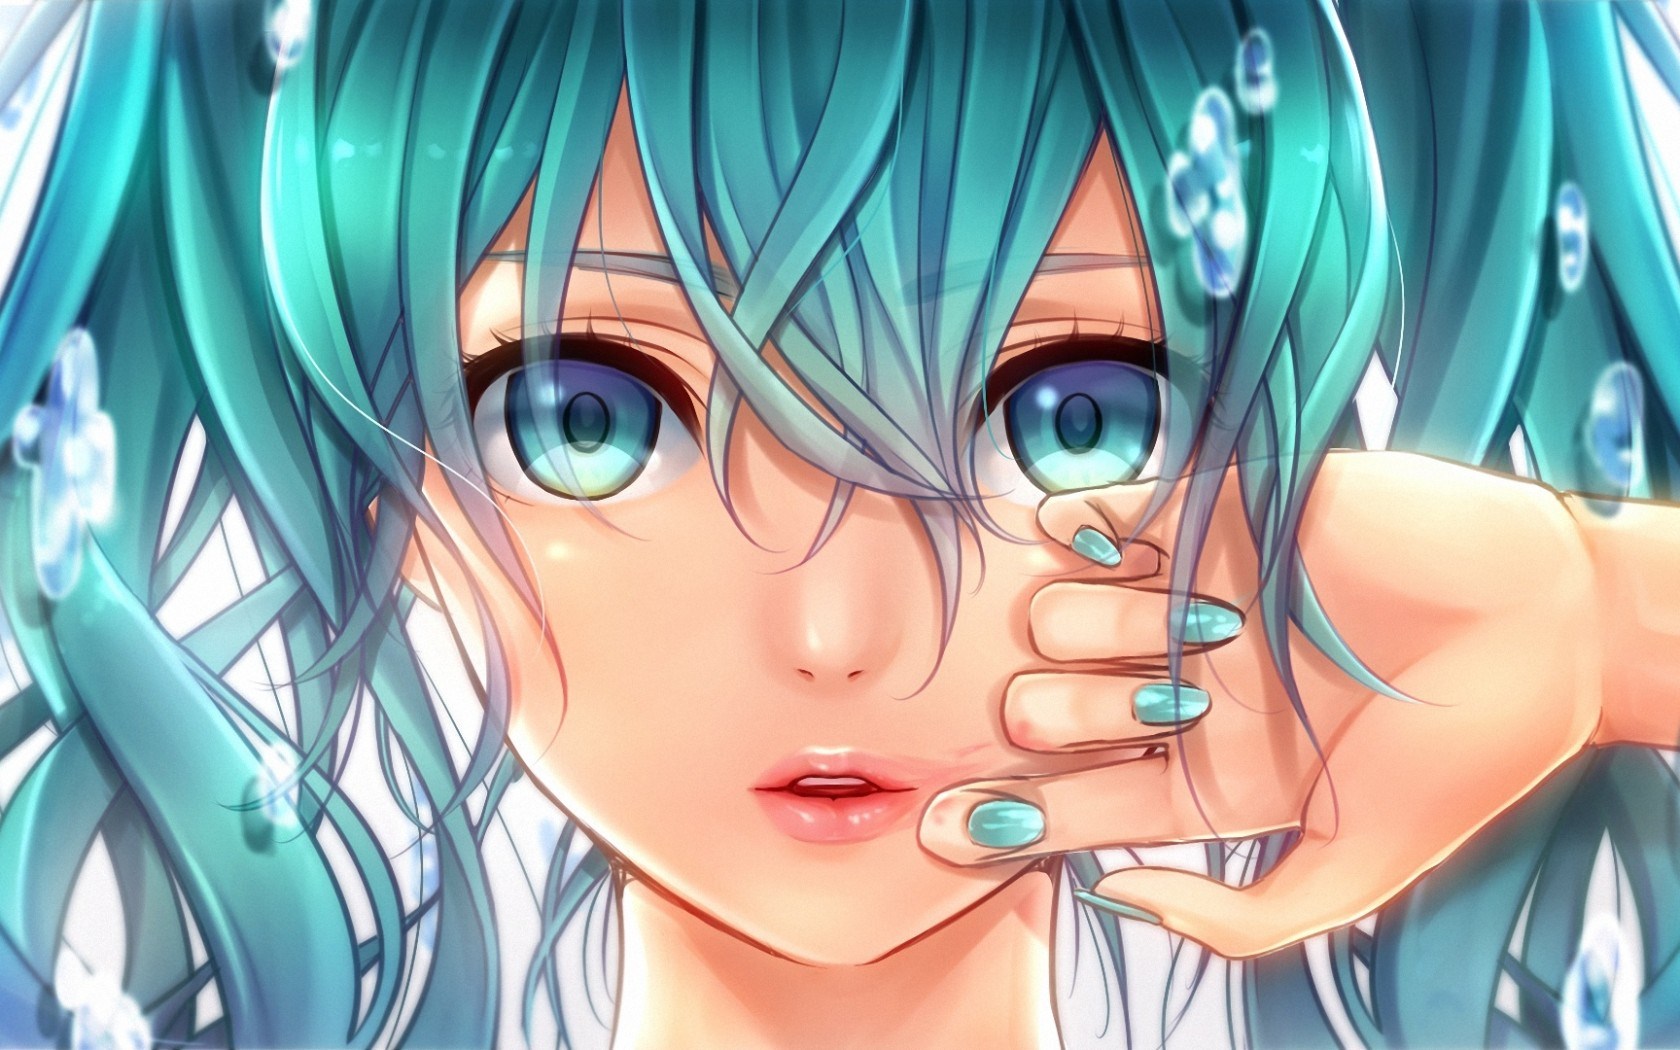 🔥 Free Download Anime Hatsune Miku Girl Face Blue Hair Desktop Background [1680x1050] For Your